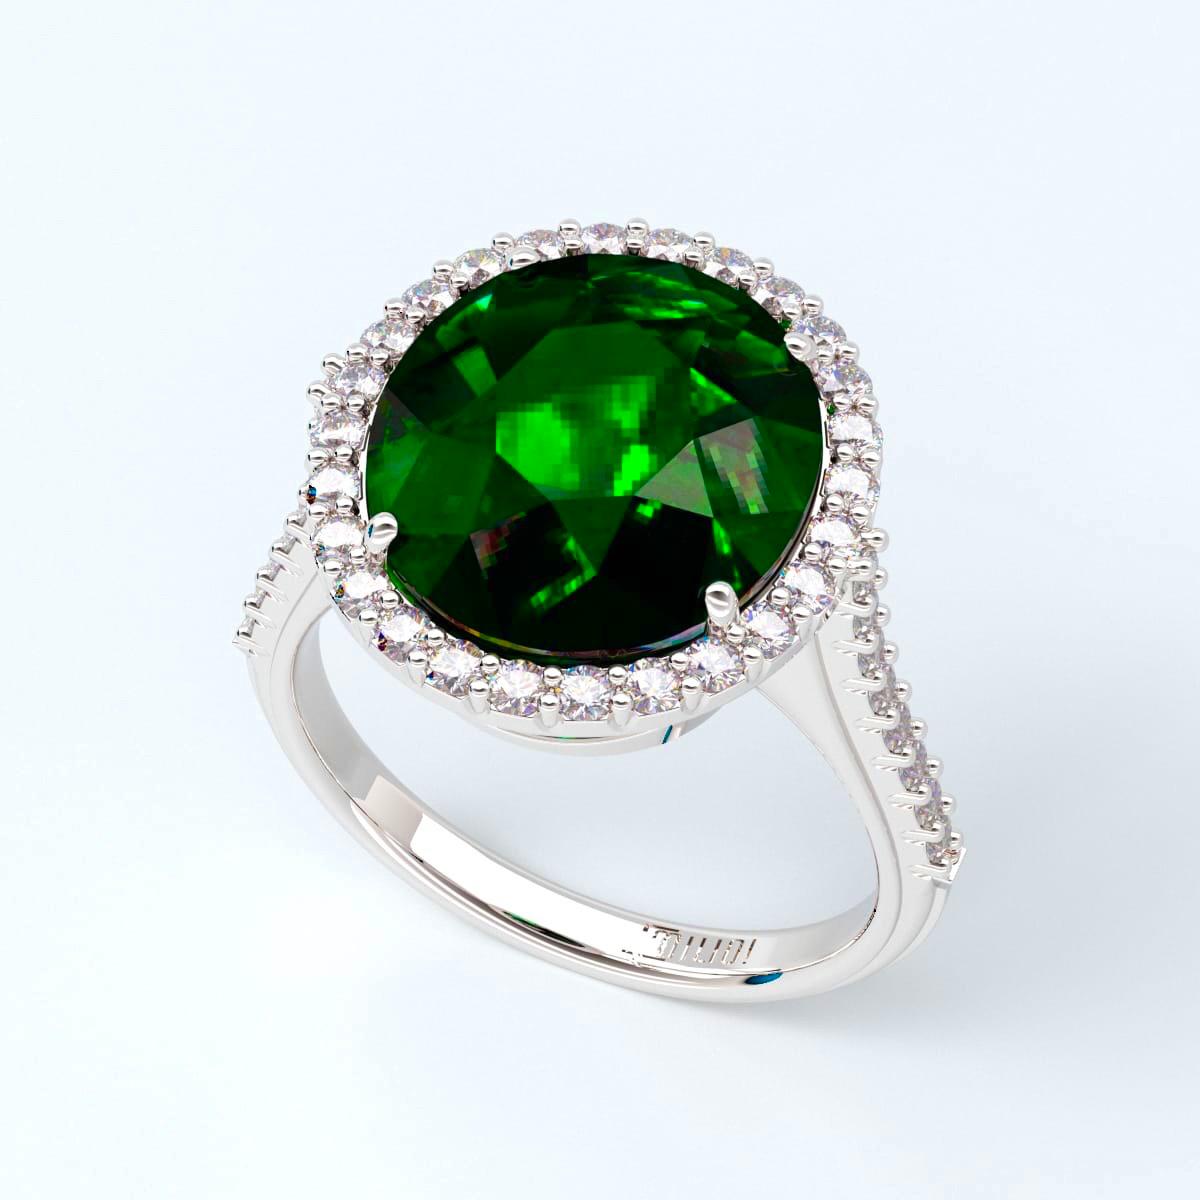 Gorgeous center emerald full of life and color set in this gorgeous hand made halo diamond mounting made of Platinum. 
We will alter the ring size to your exact finger size. 
The diamond quality is E color vs1 clarity. 
The center emerald has an